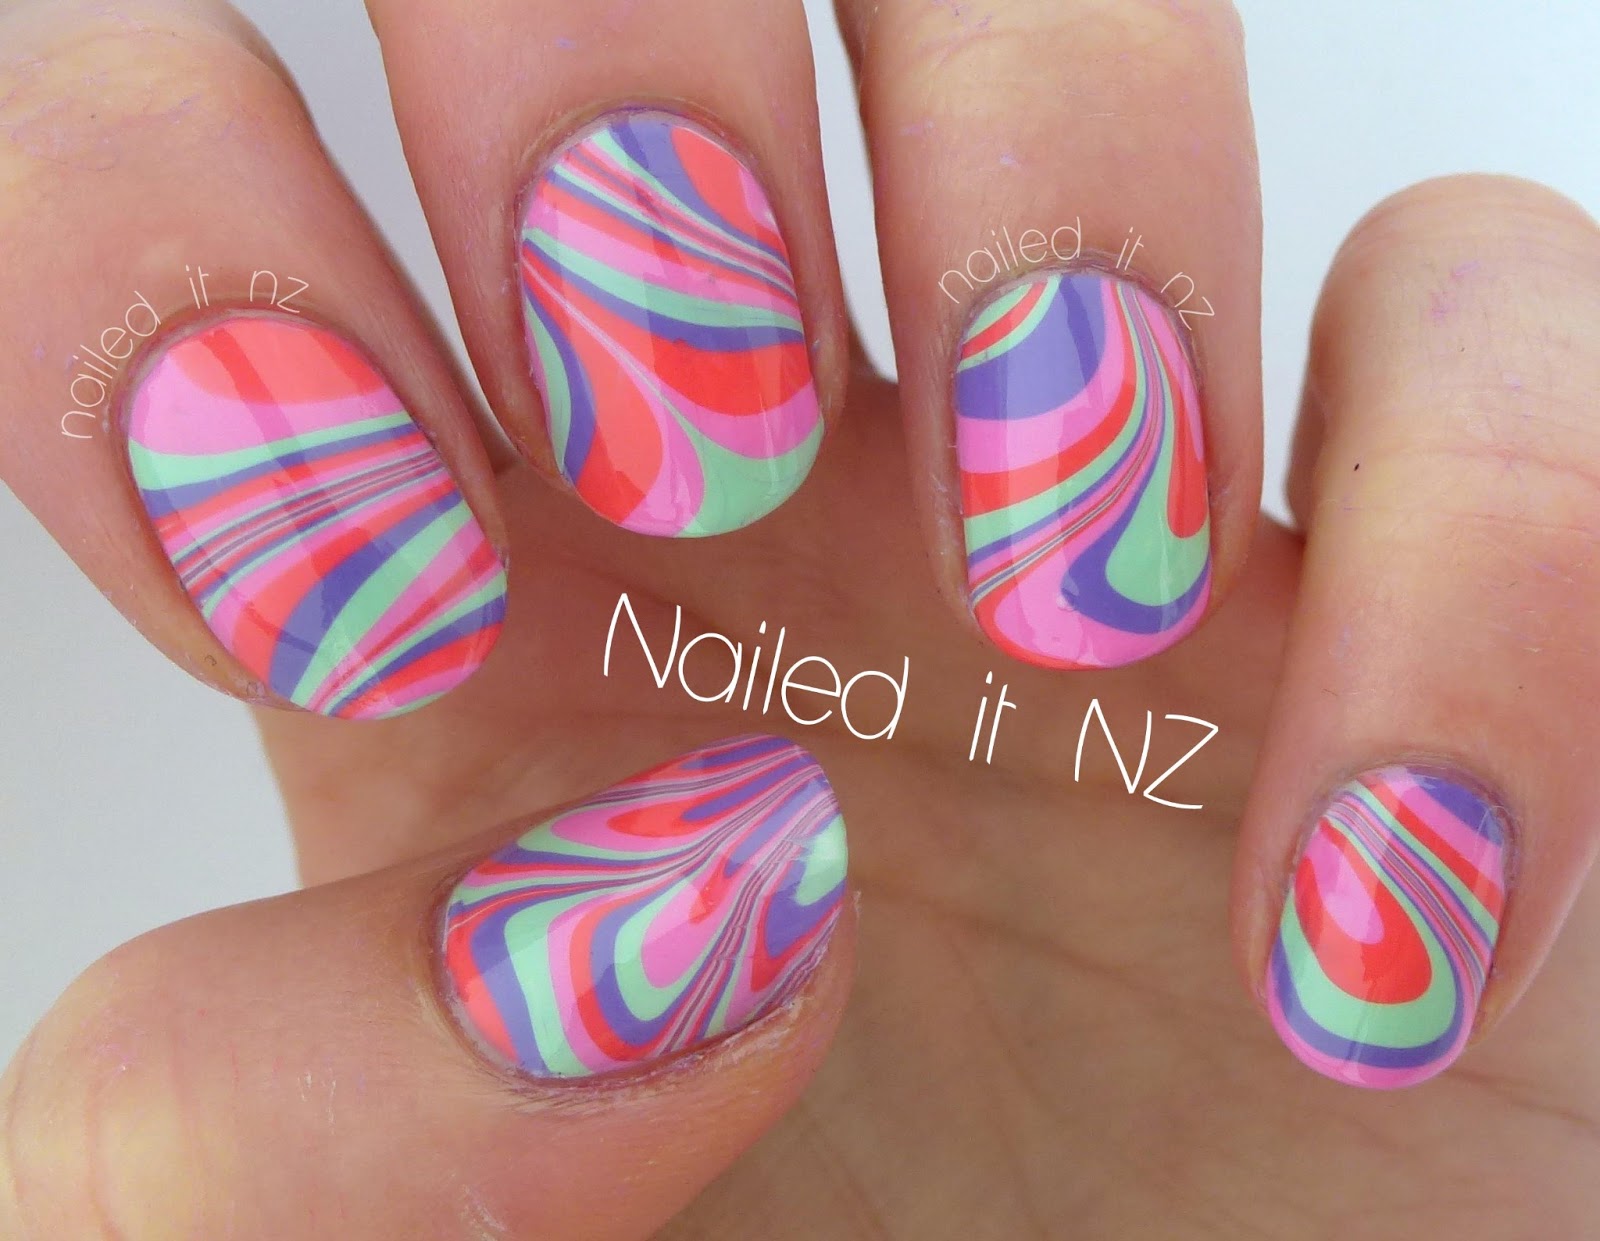 3. How to Create a Stunning Water Marble Nail Design - wide 7